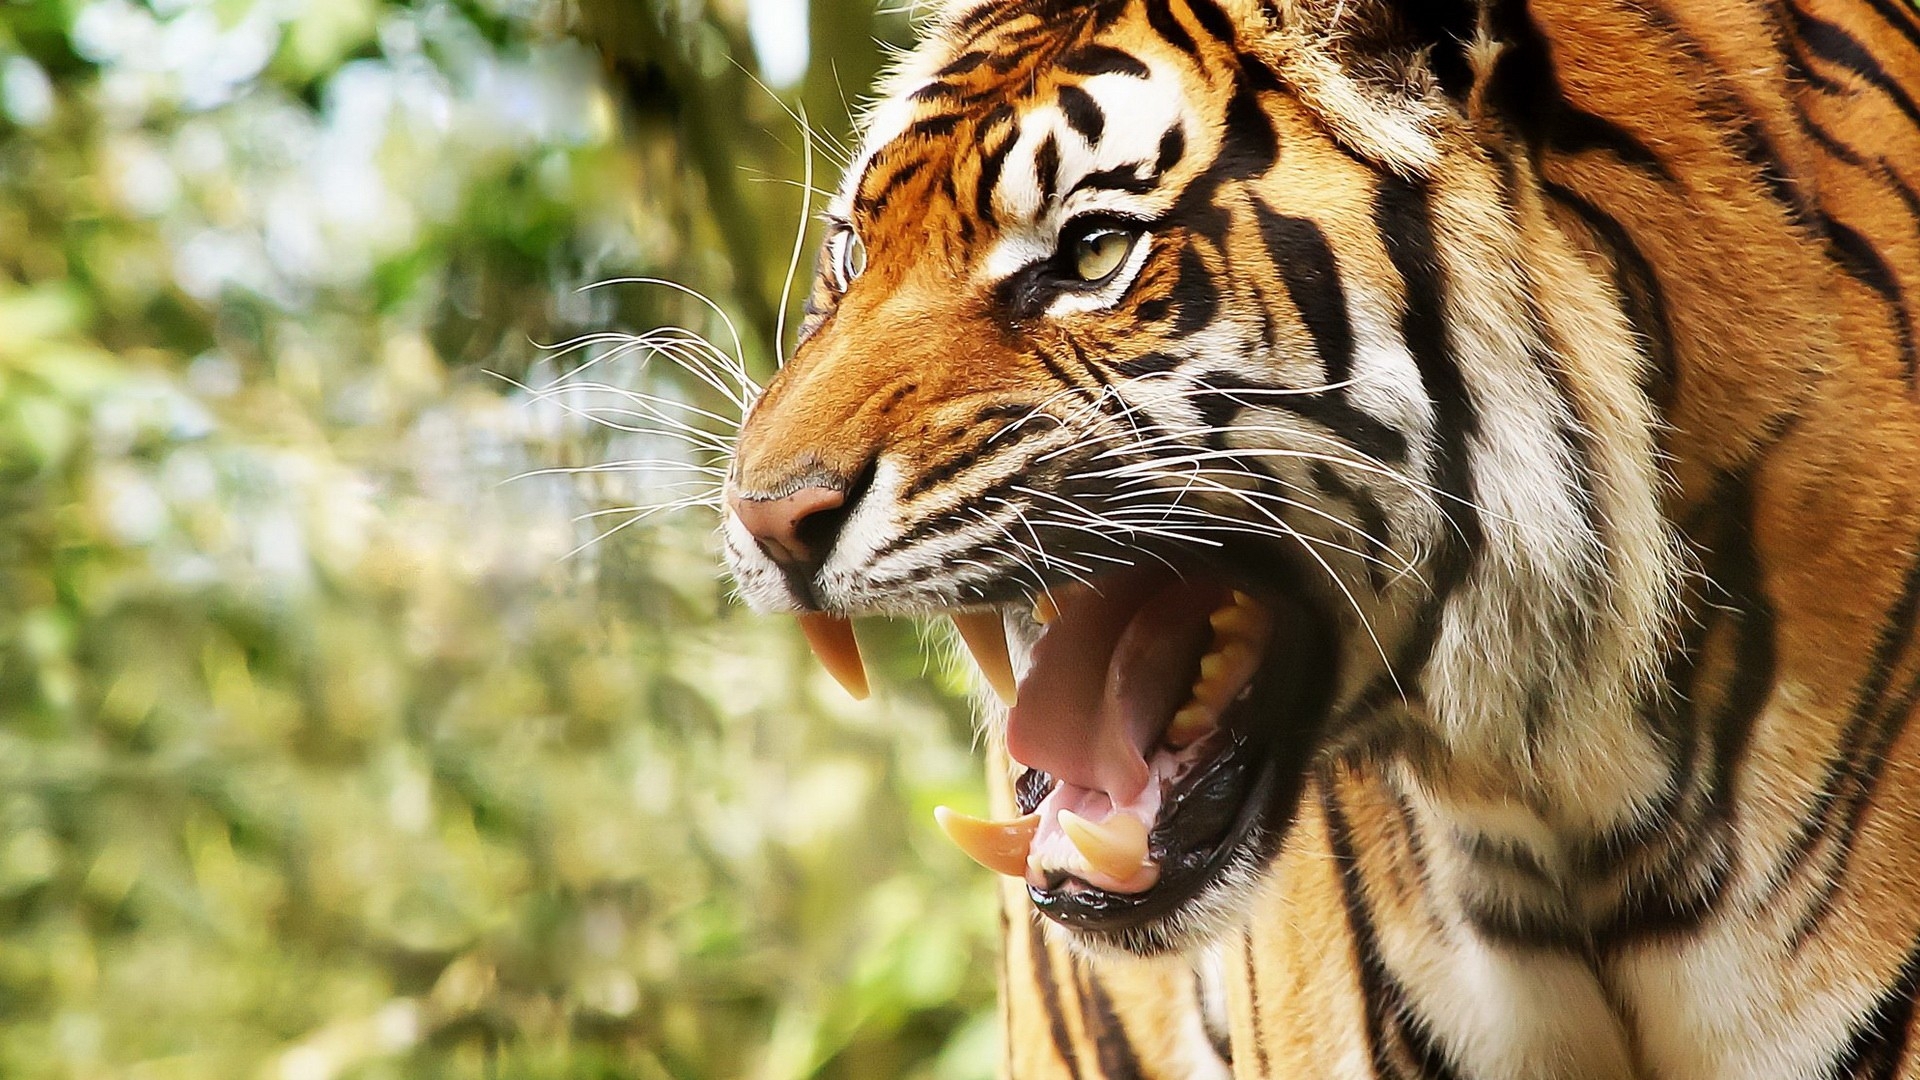 tiger face wallpapers #19